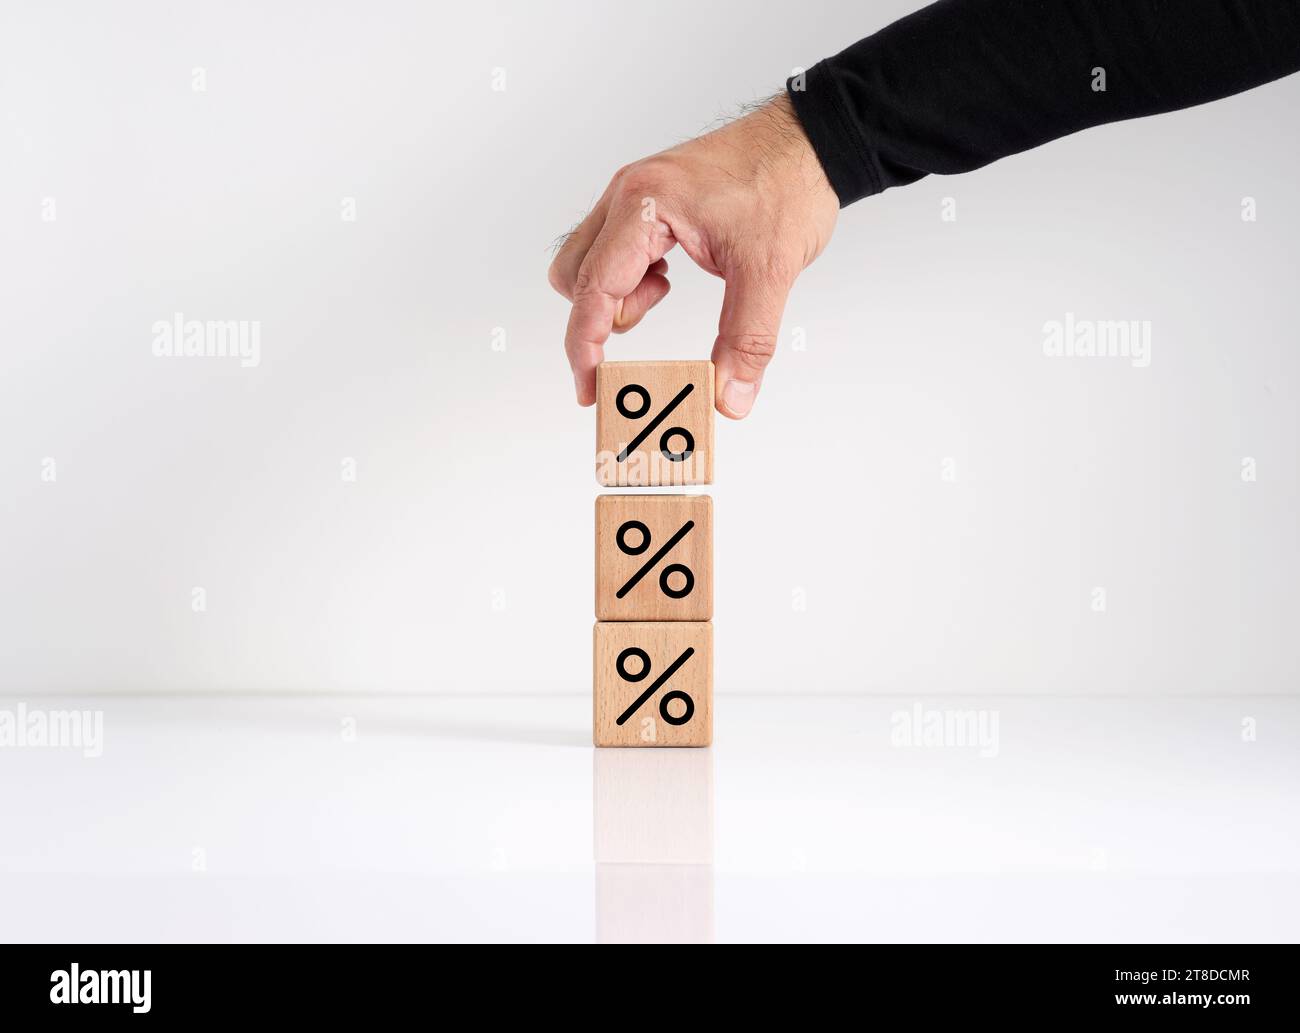 Increasing mortgage or interest rate, profitability or market share. Growing return on stocks and funds. Business and financial growth. Hand stacking Stock Photo